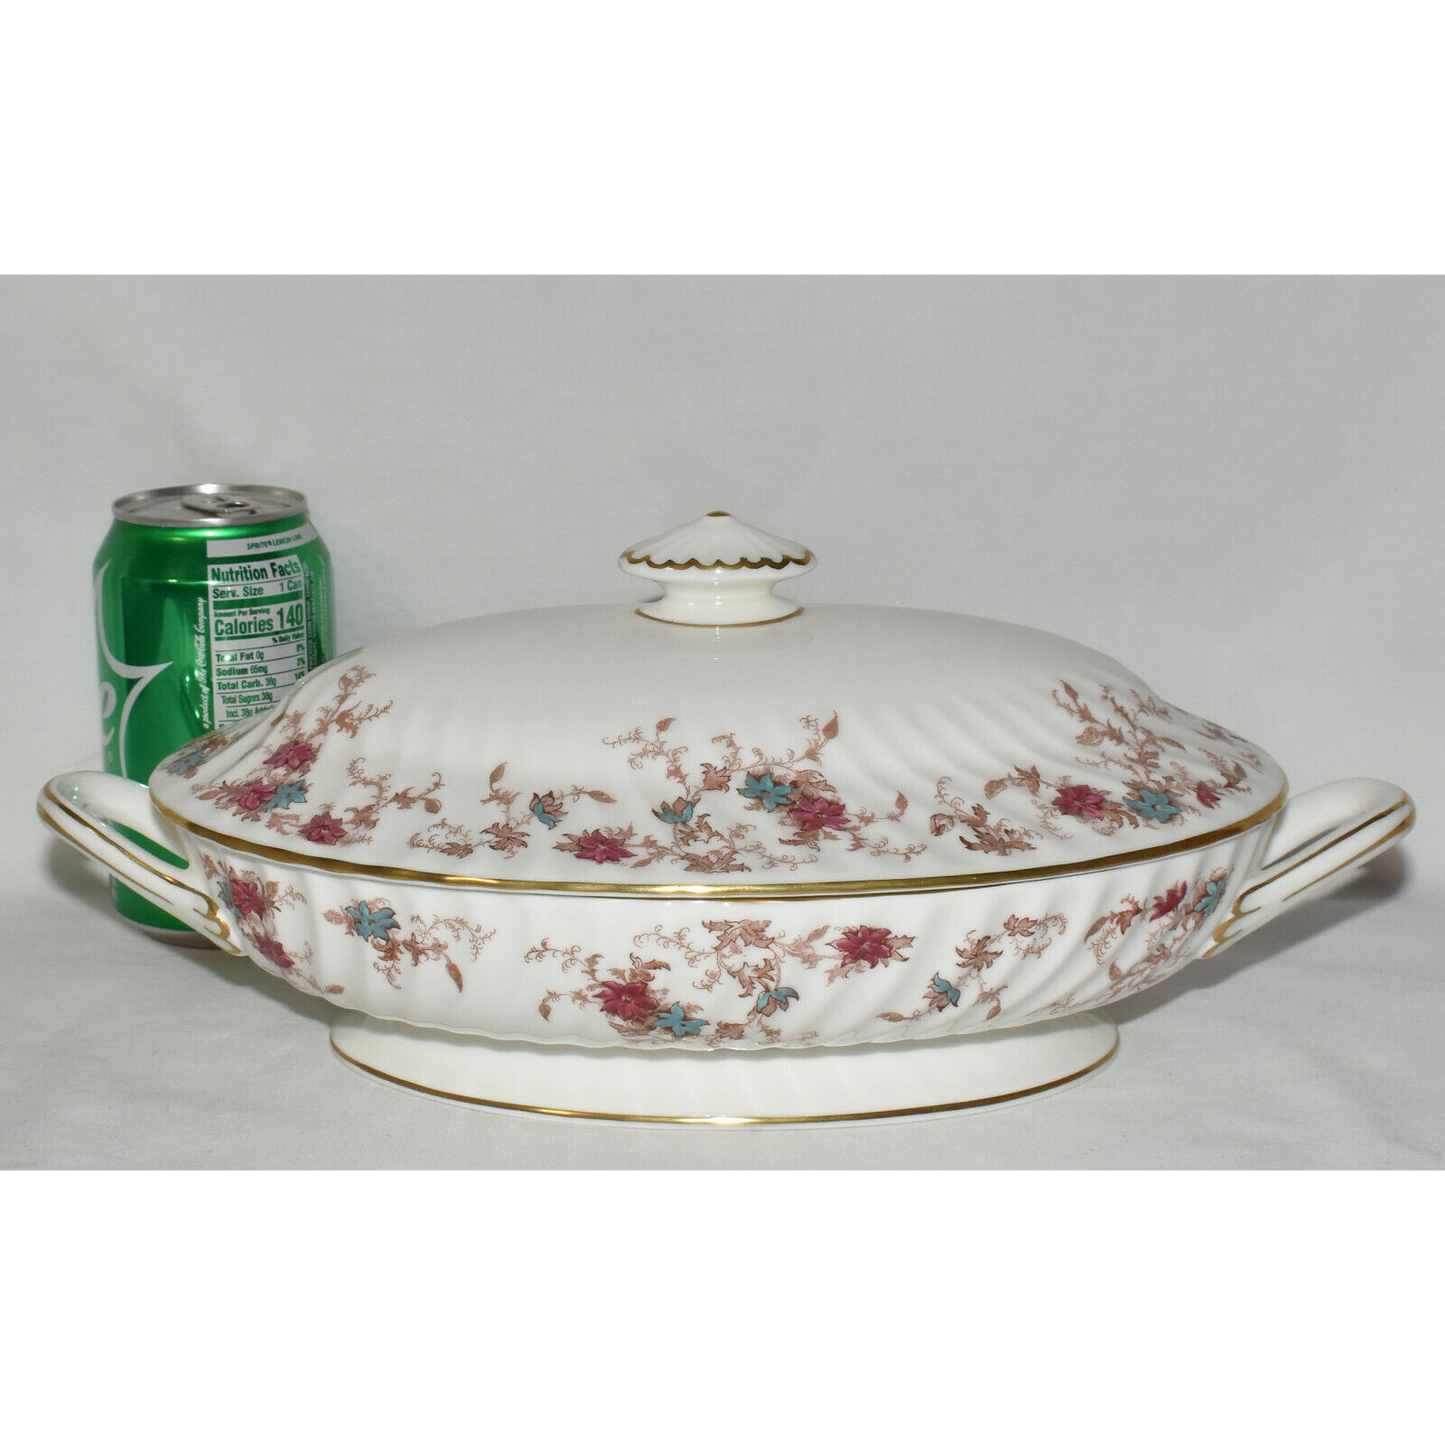 Minton Bone China Ancestral 14" Covered Serving Bowl with Double Handles England